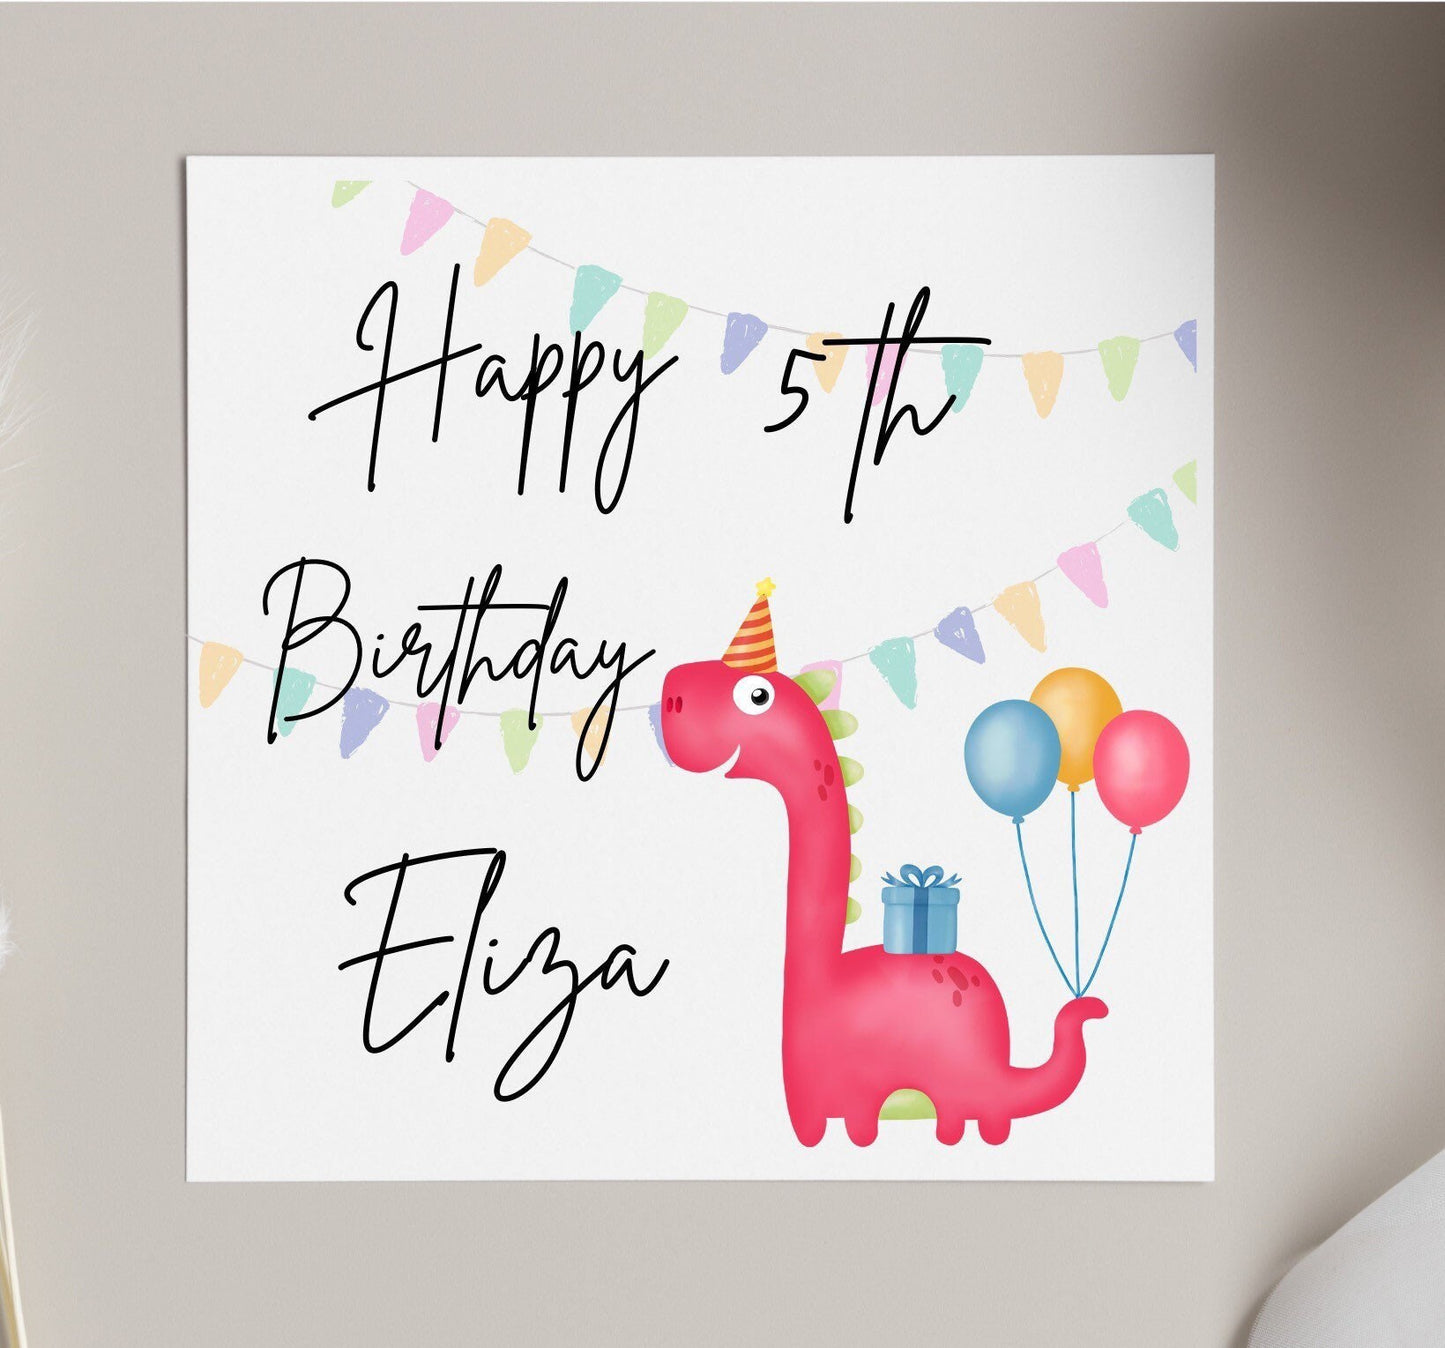 Personalised age and name Happy birthday card, roarsome dinosaur birthday, kids love dinos, children party cards